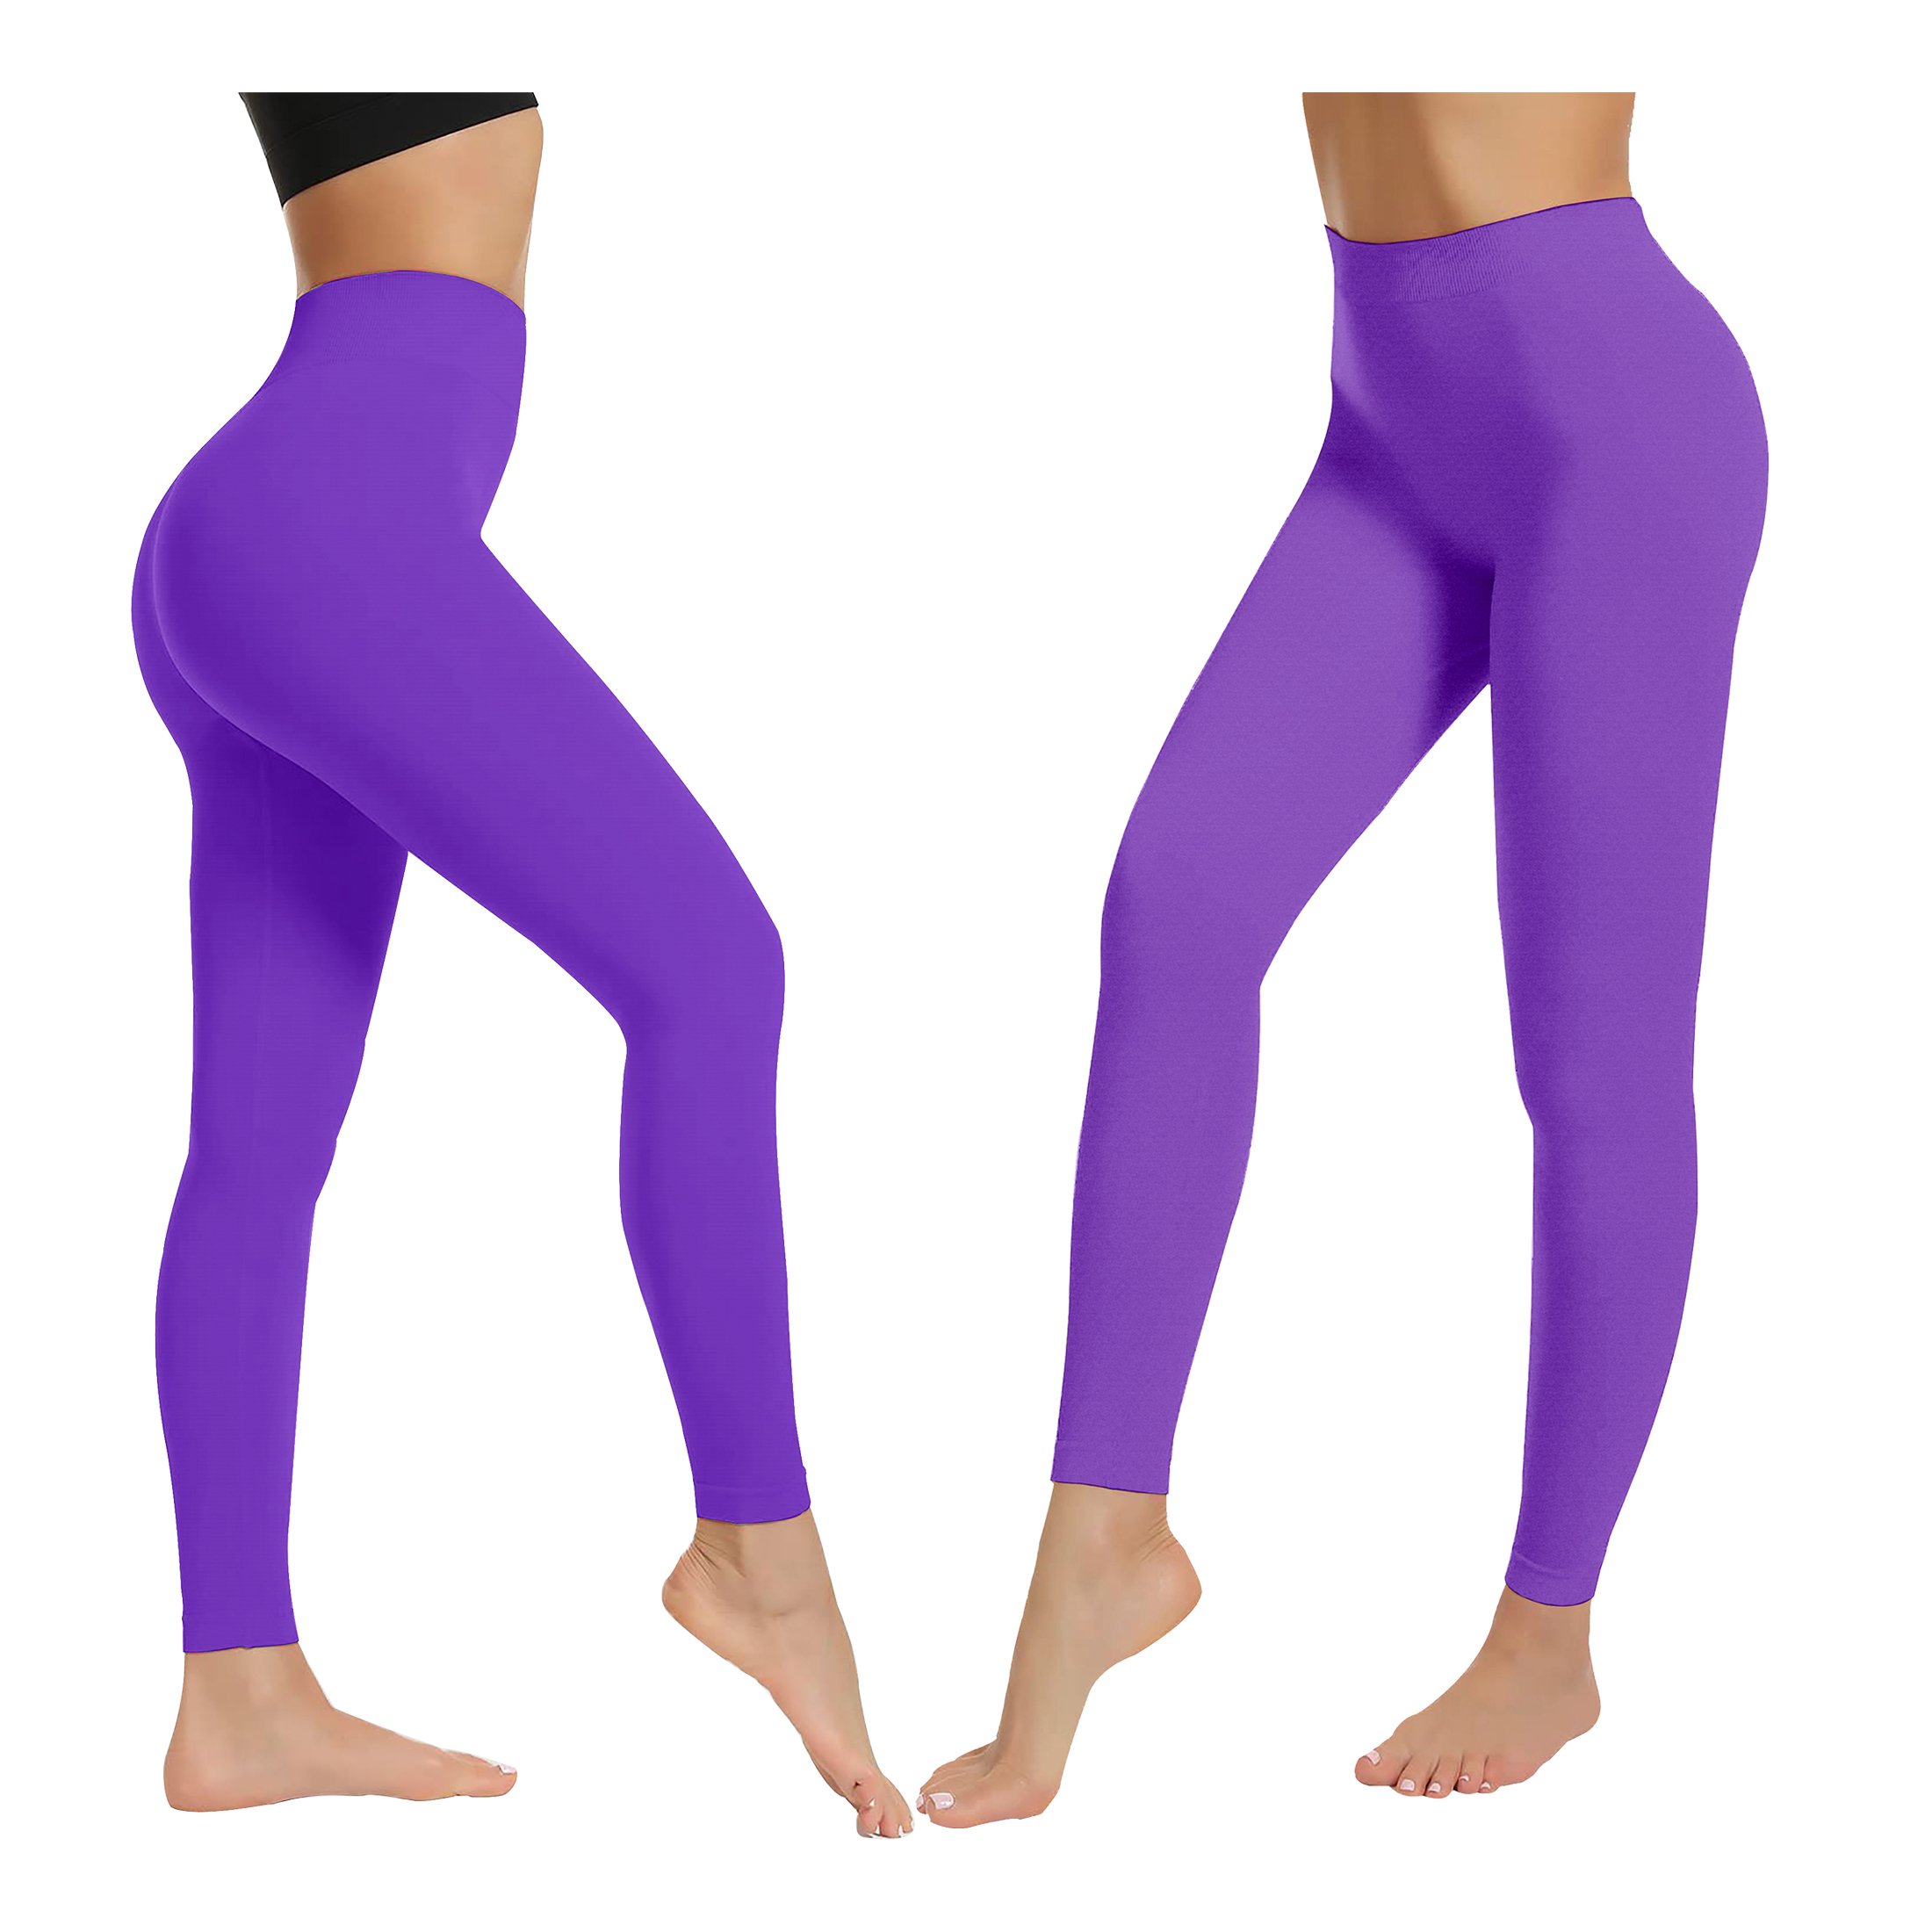 2-Pack: Women's High-Waist Ultra-Soft Stretchy Solid Fitness Yoga Leggings Pants - XS